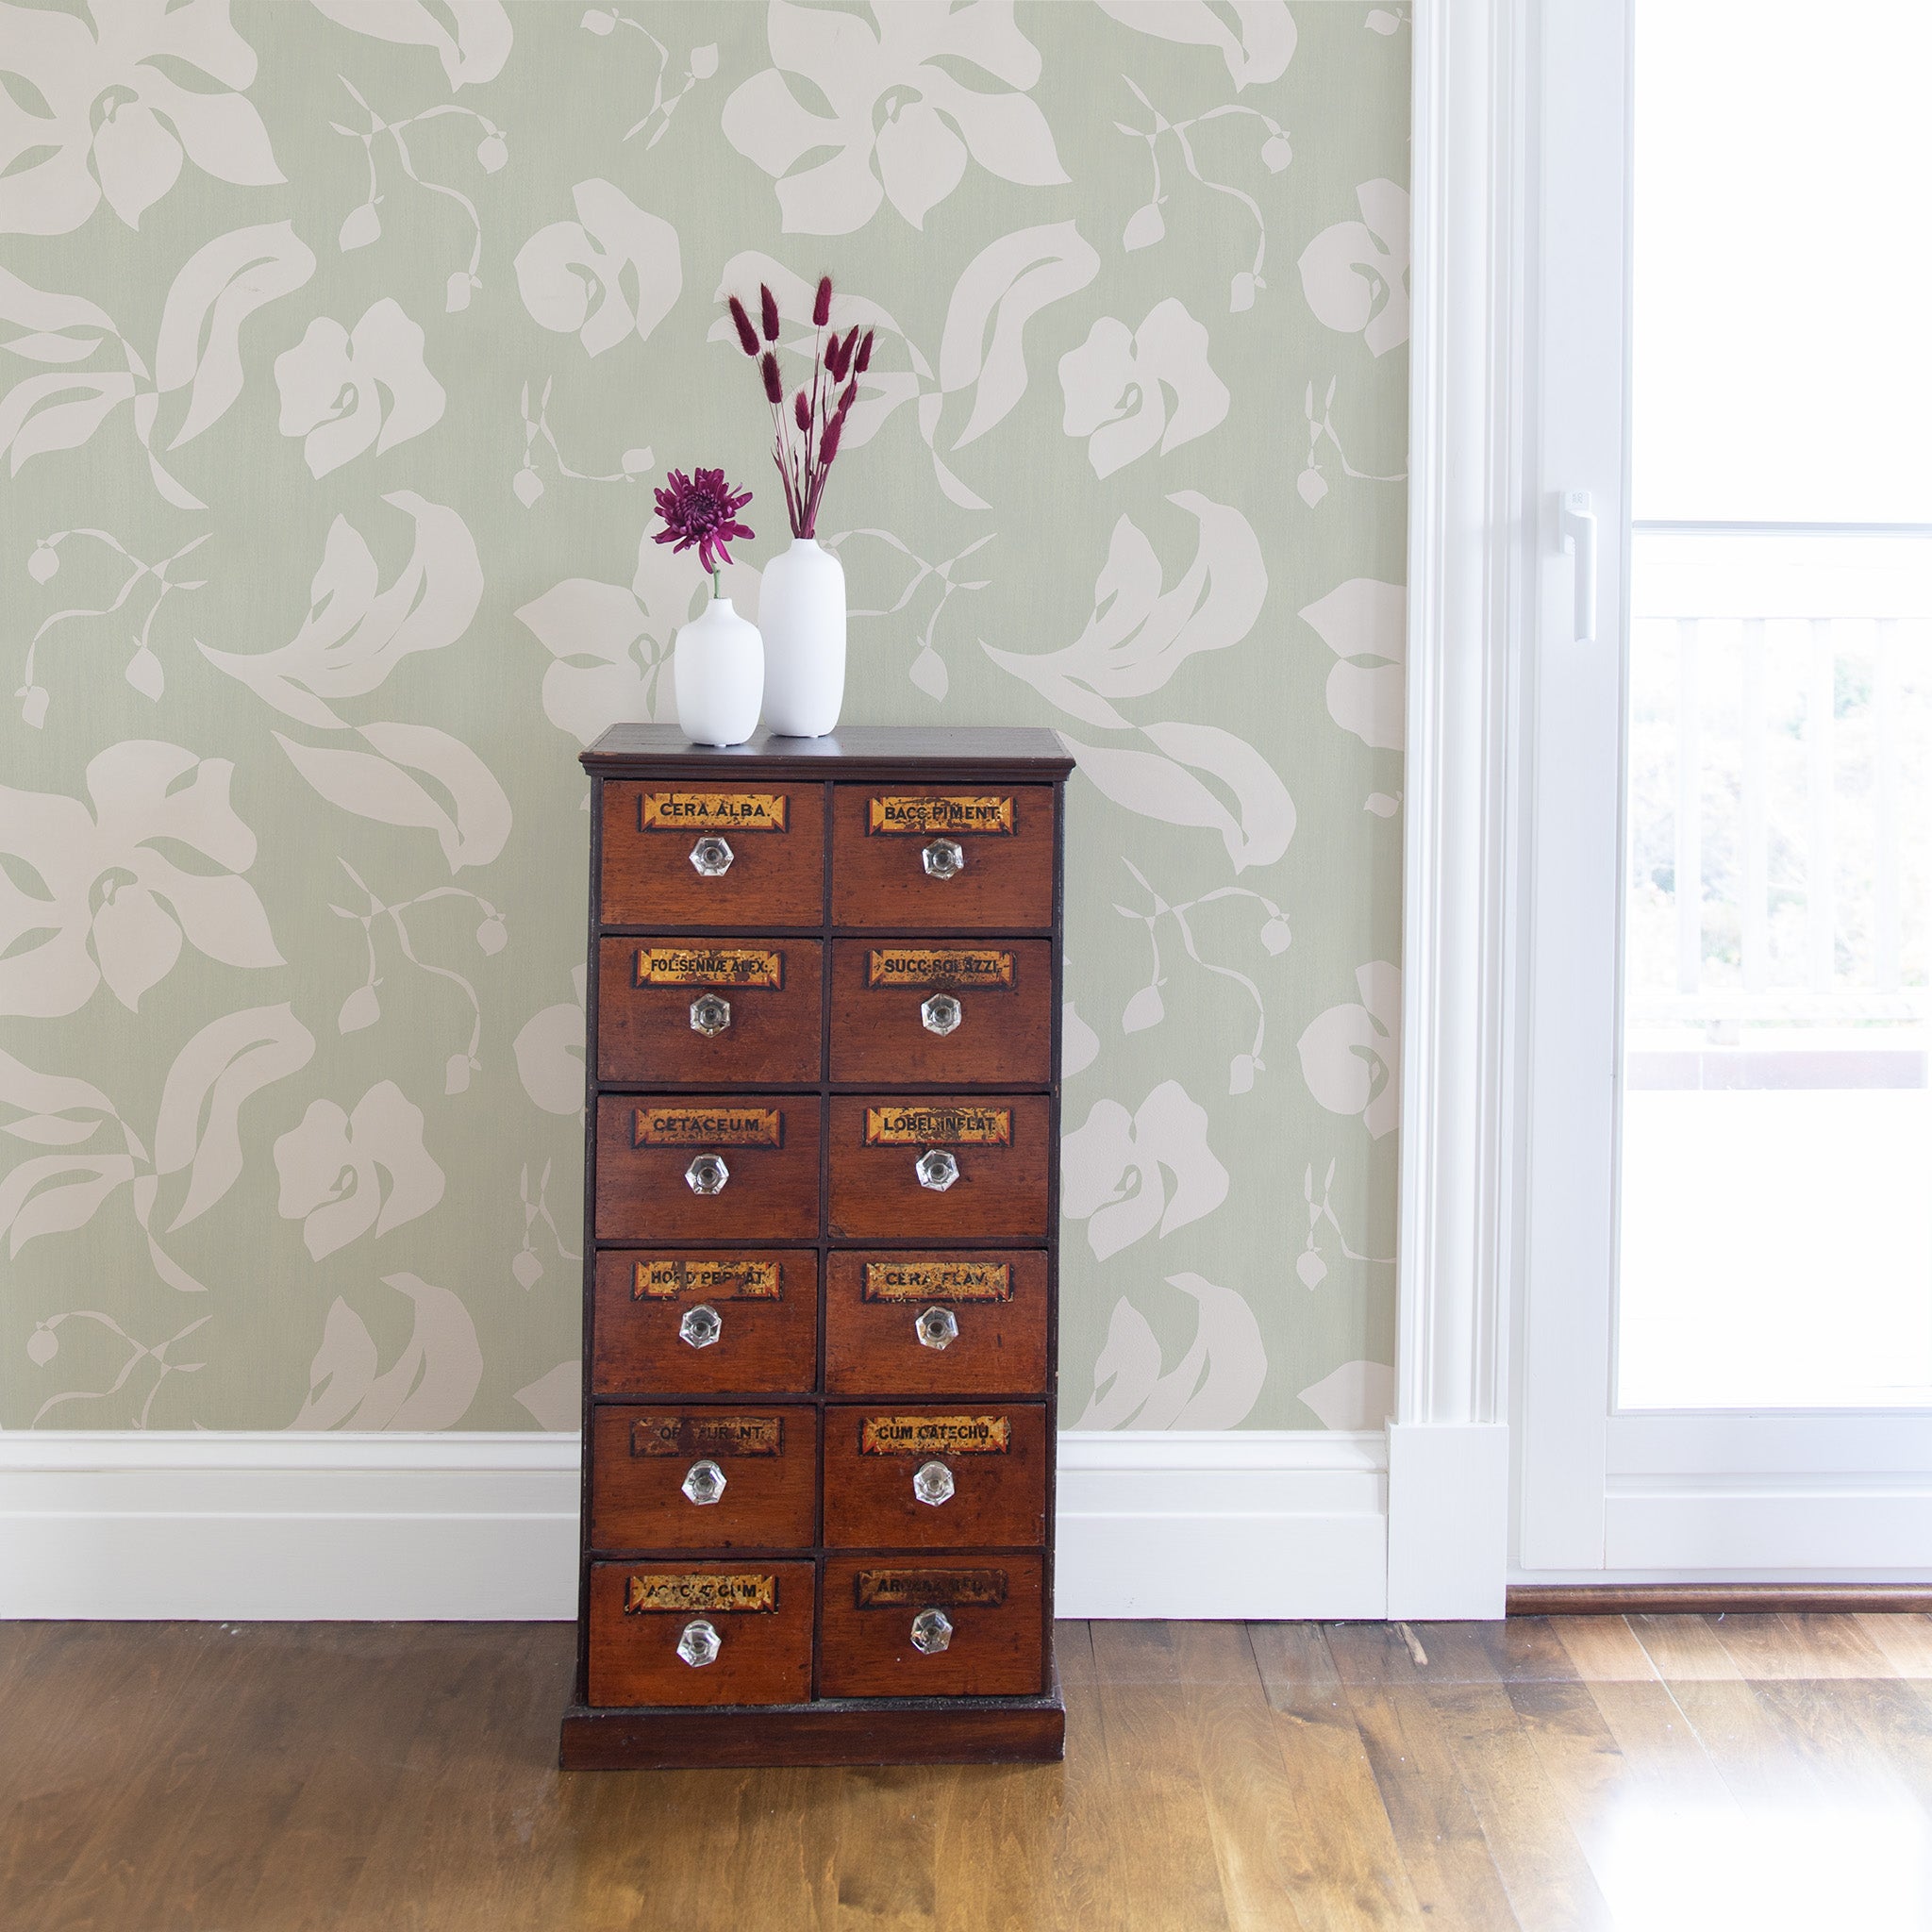 wall with green and white floral wallpaper and a brown cabinet with white vases and red flowers